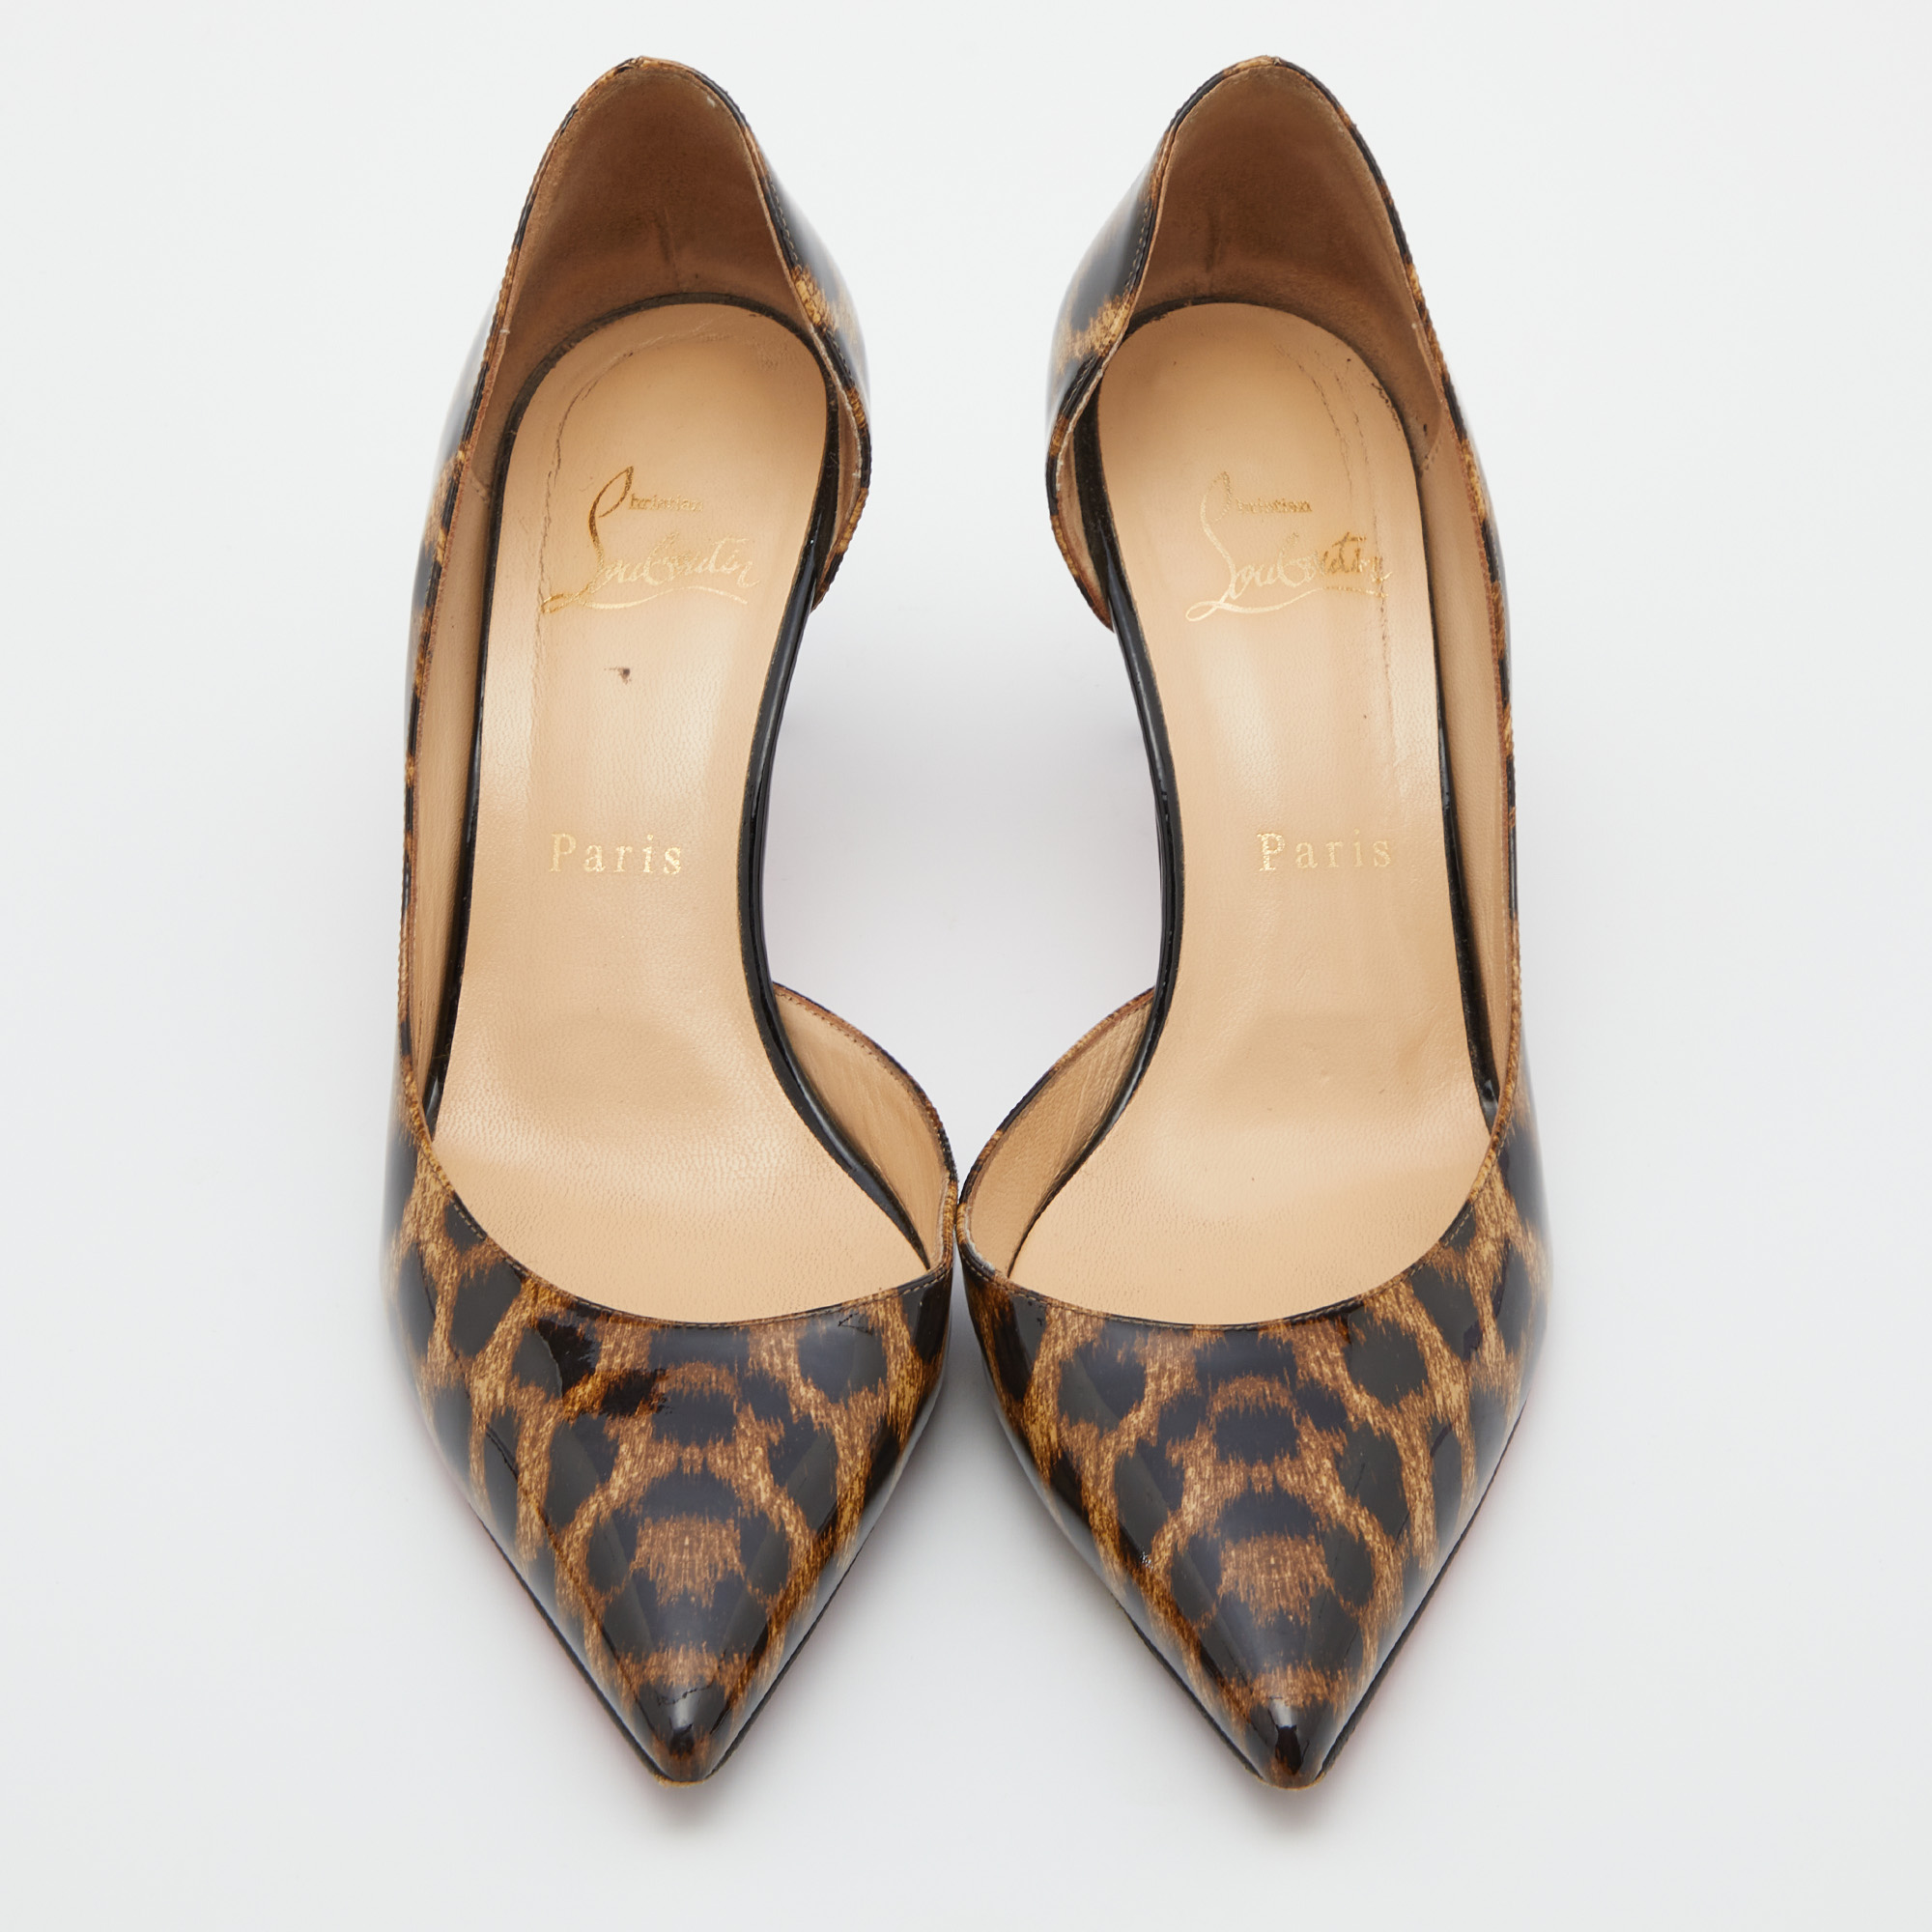 Christian Louboutin Brown Leopard Print Patent Leather Iriza Pointed Toe D'orsay Pumps Size 37.5